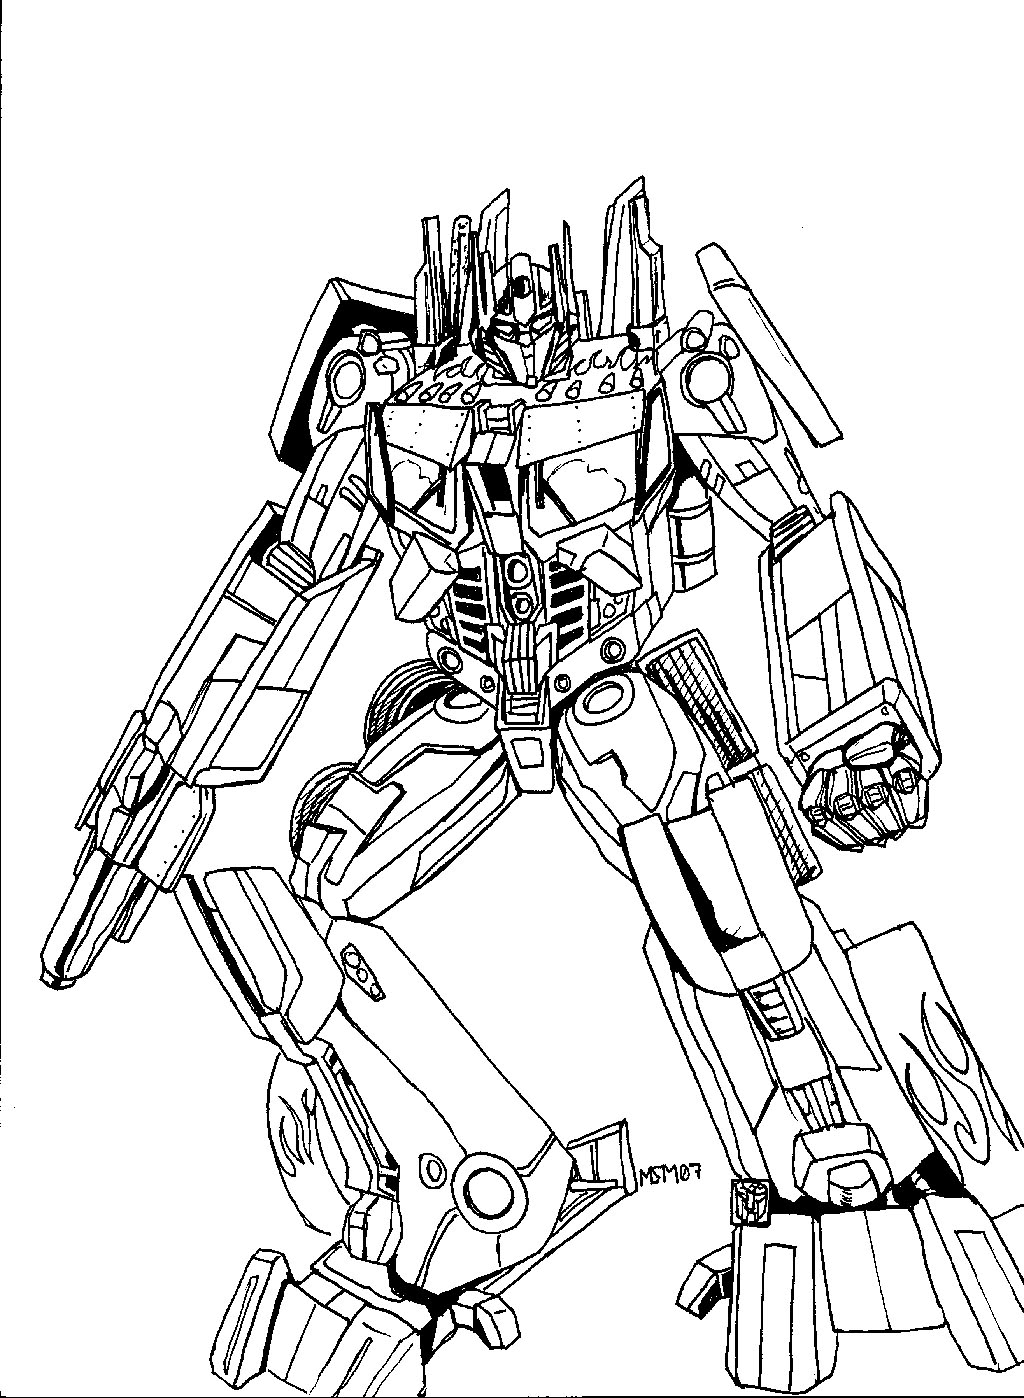 Download Bumblebee Optimus Prime Transformers Coloring Pages ...